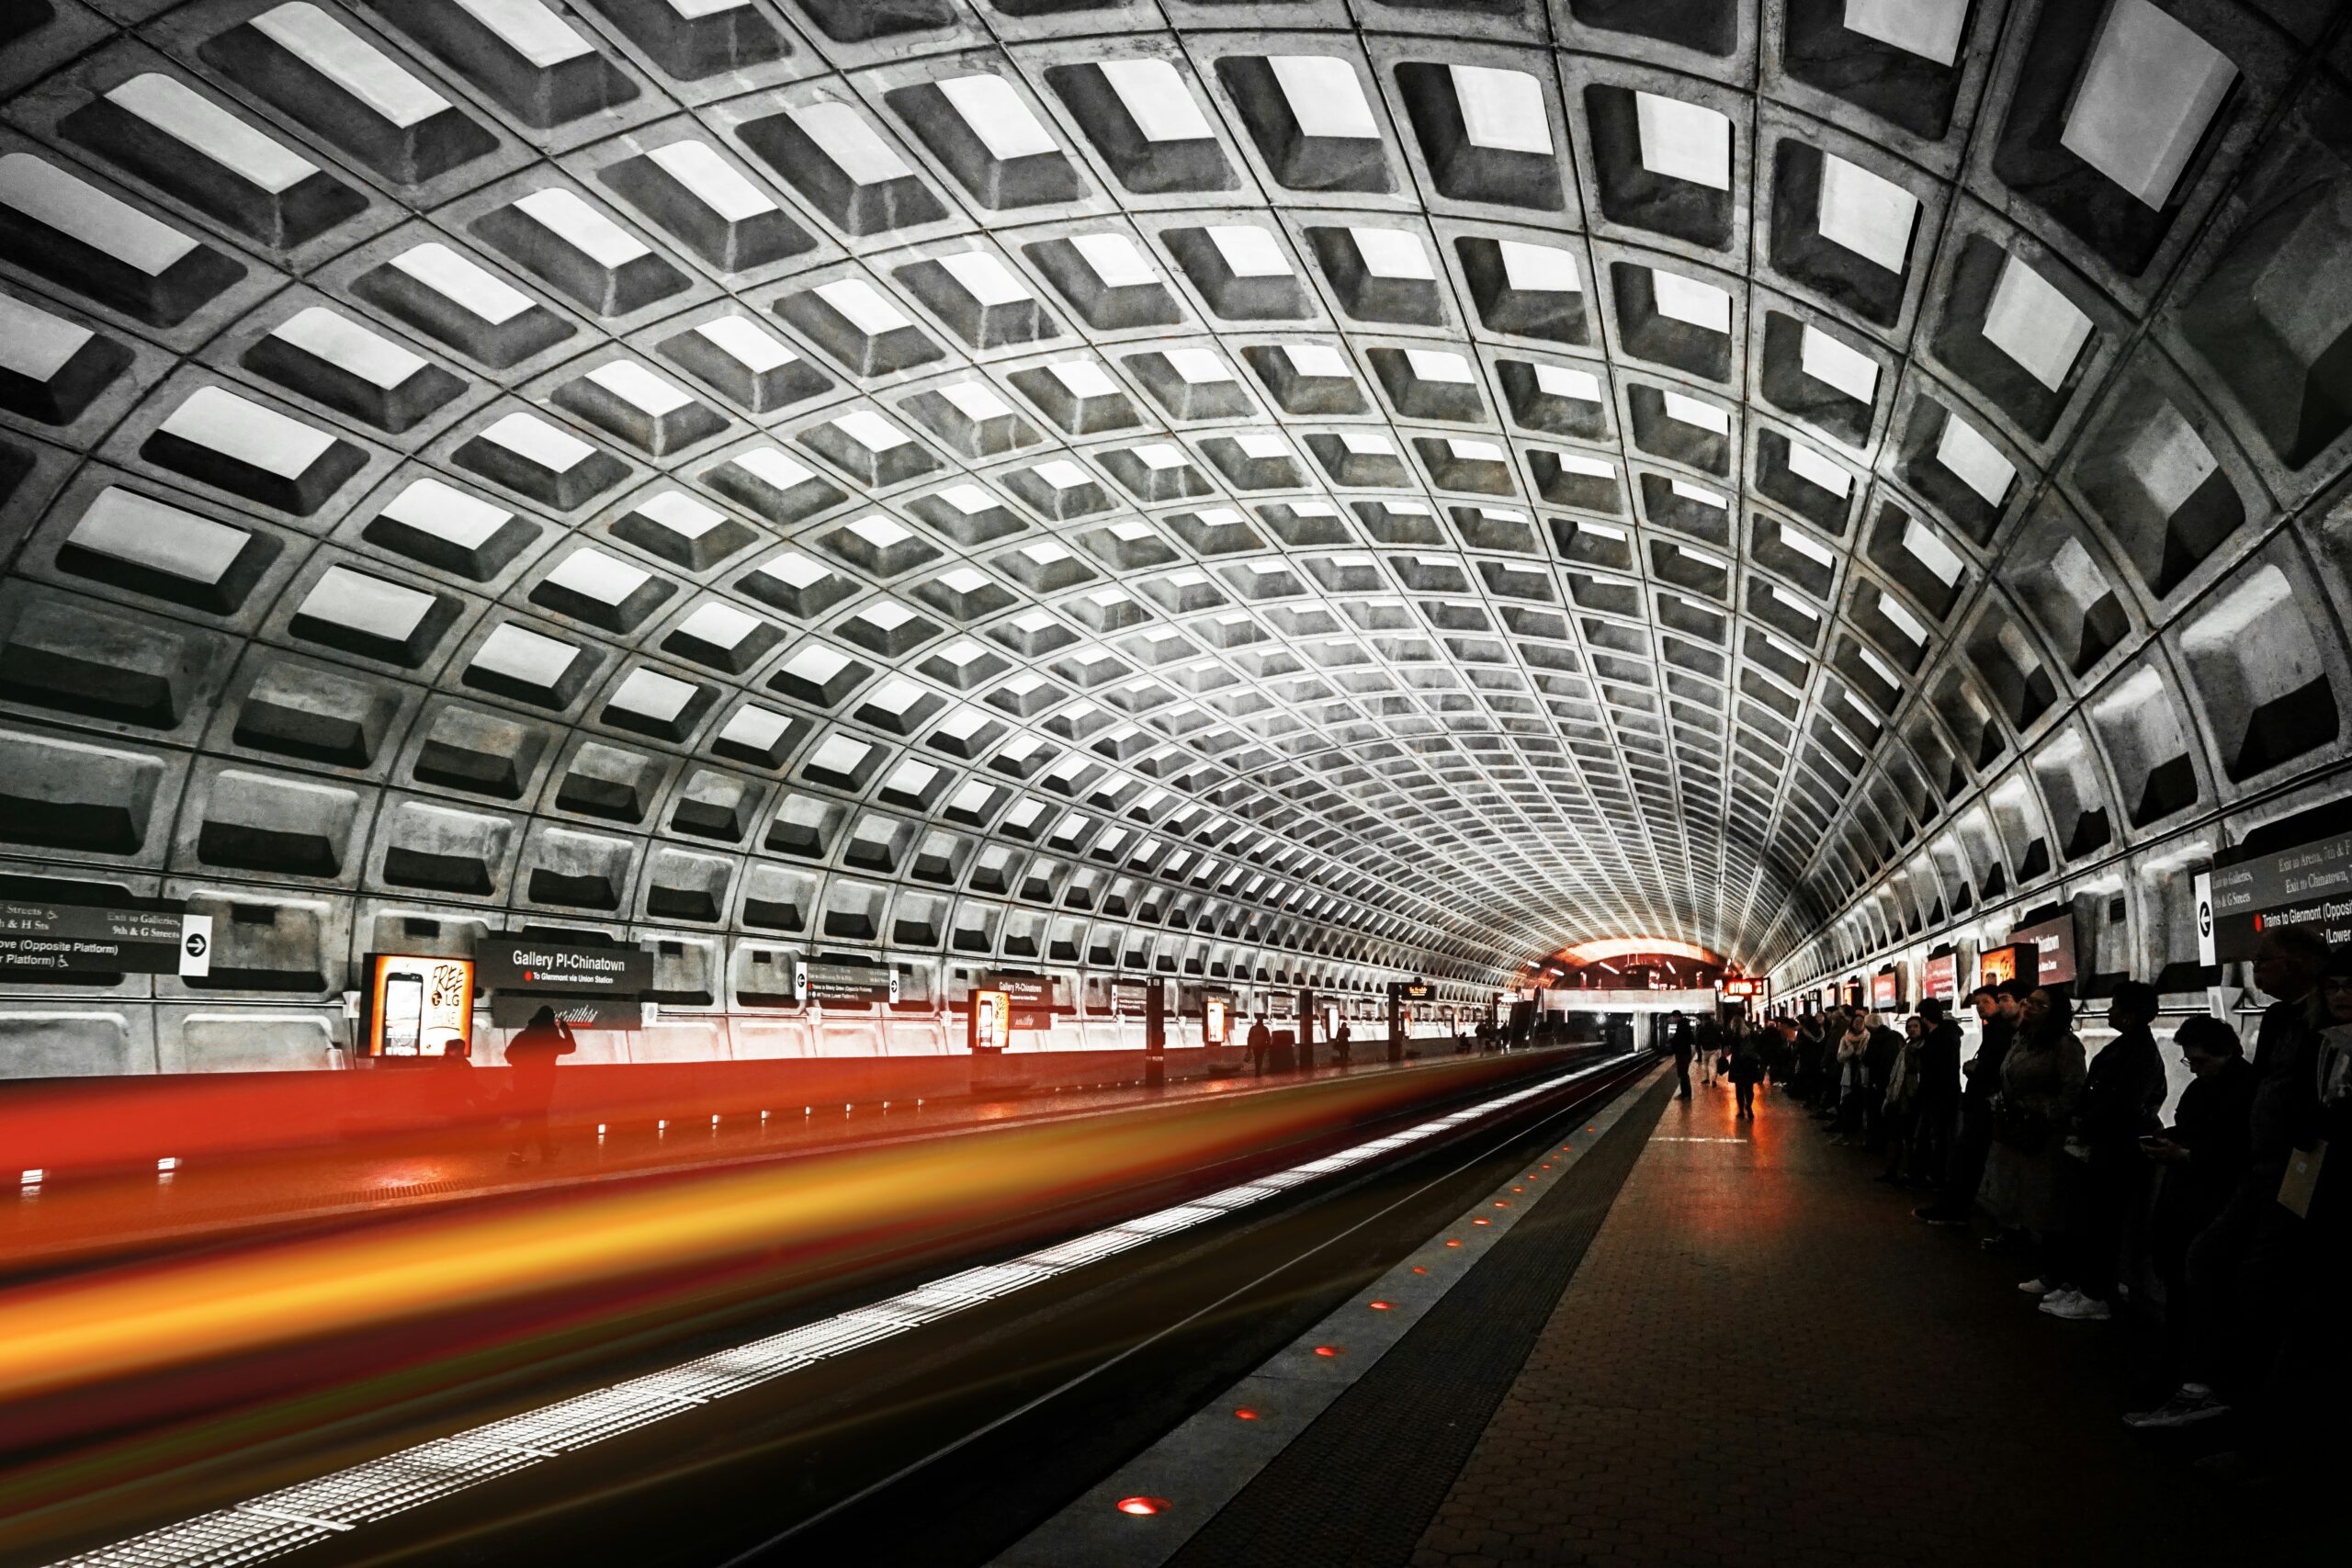 Check out these ways to stay safe while in D.C., especially for those using public transportation.
pictured: the Washington D.C. metro 